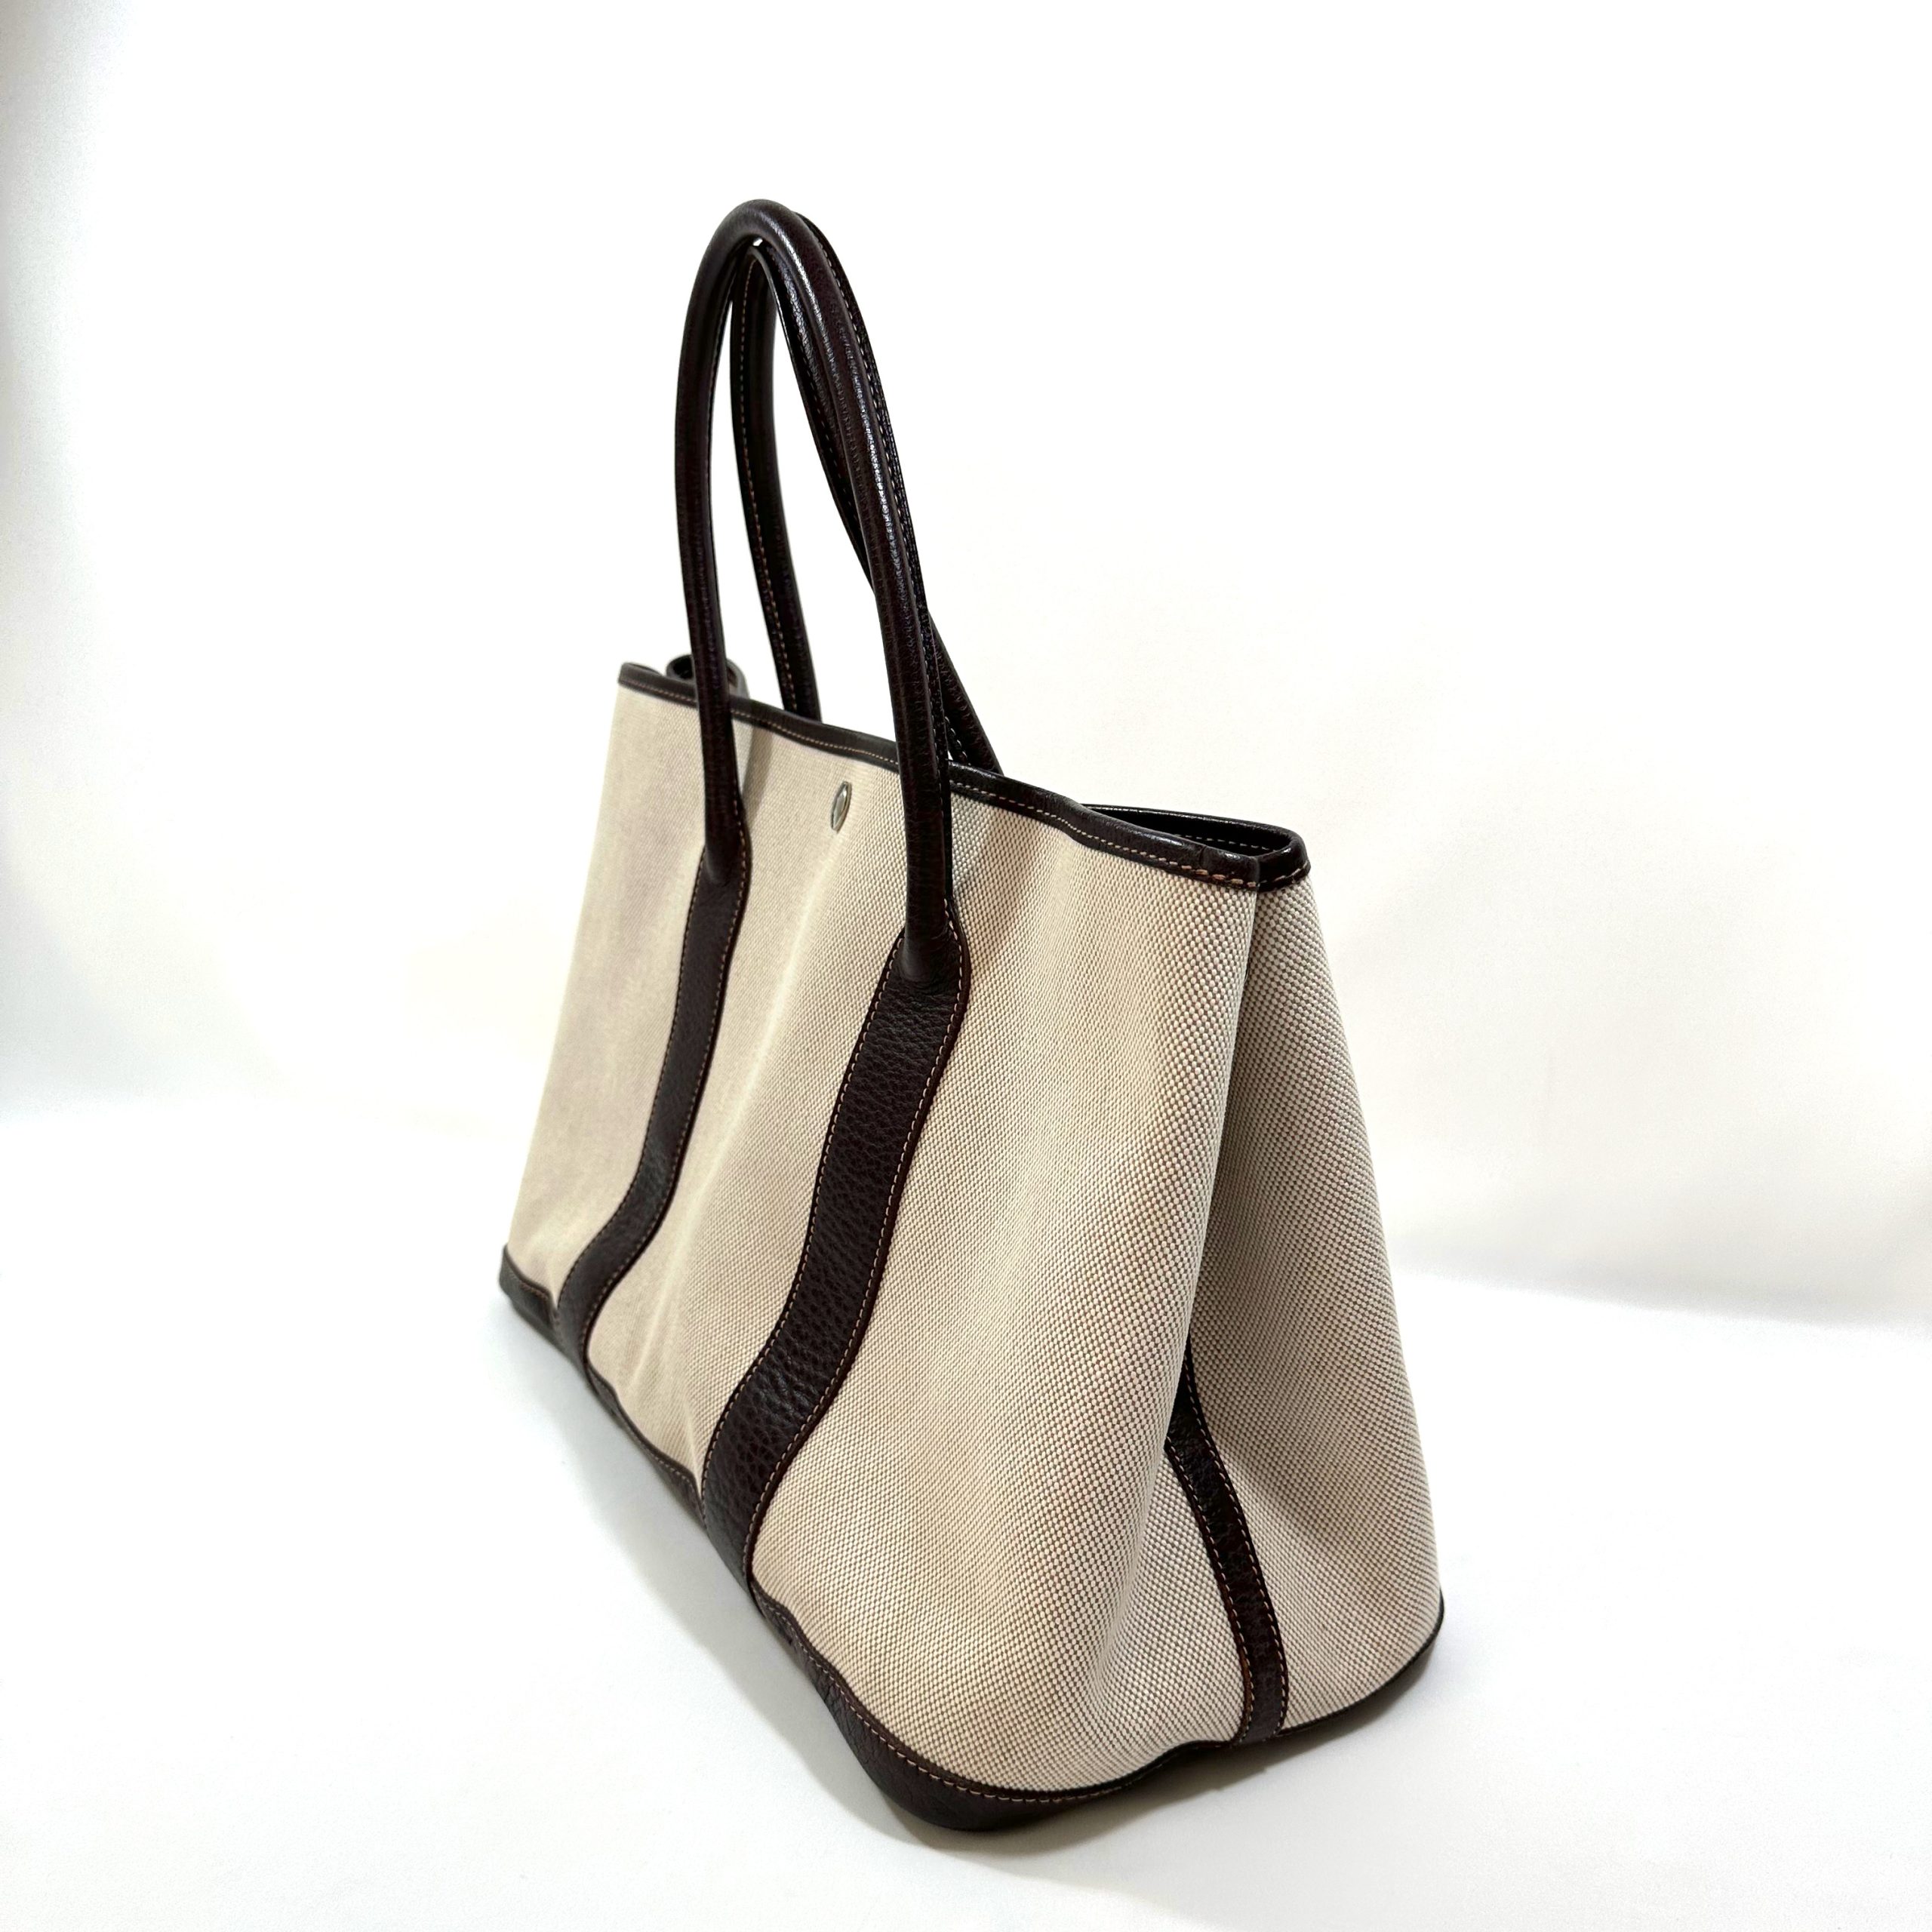 HERMÈS GARDEN PARTY TOTE 36 IN EBONY CANVAS & BROWN TOGO LEATHER